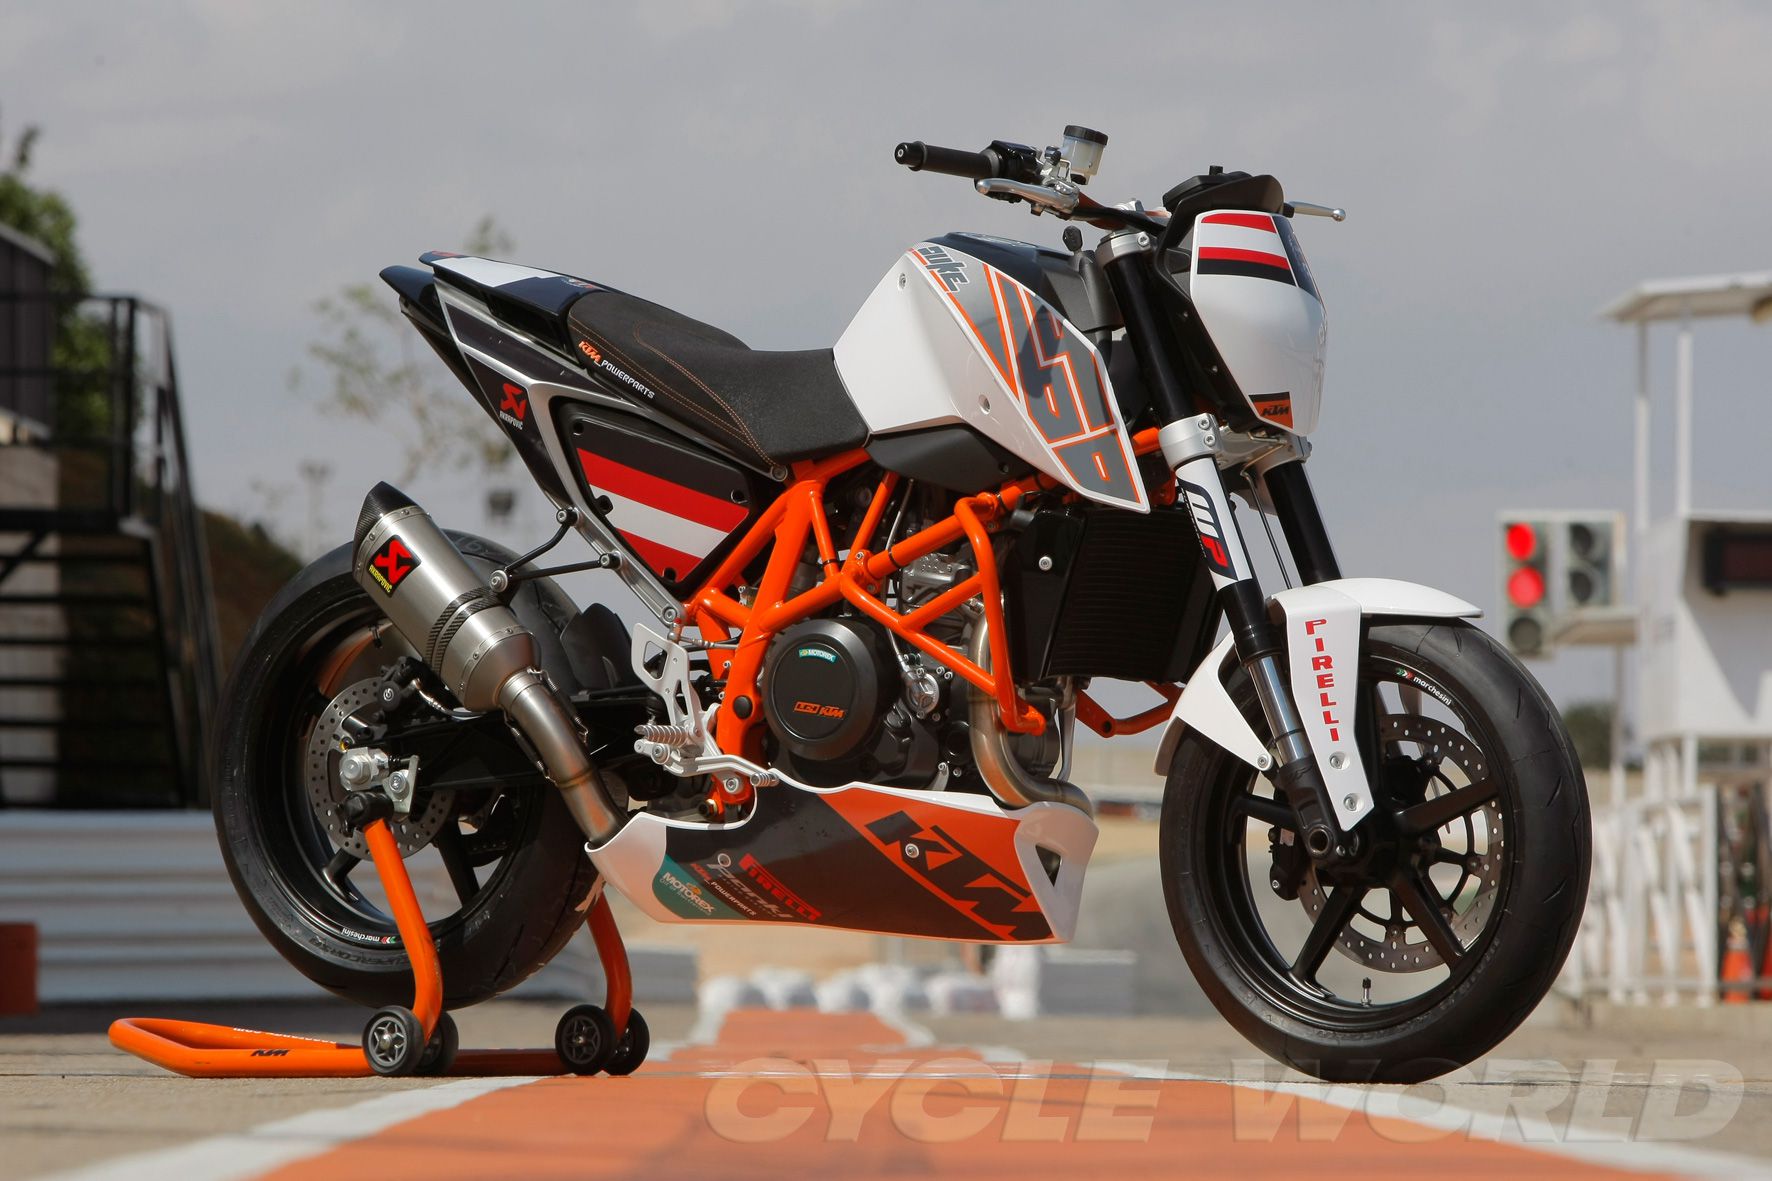 Ktm 690 Duke Track First Look Review Special Racing Edition Cycle World